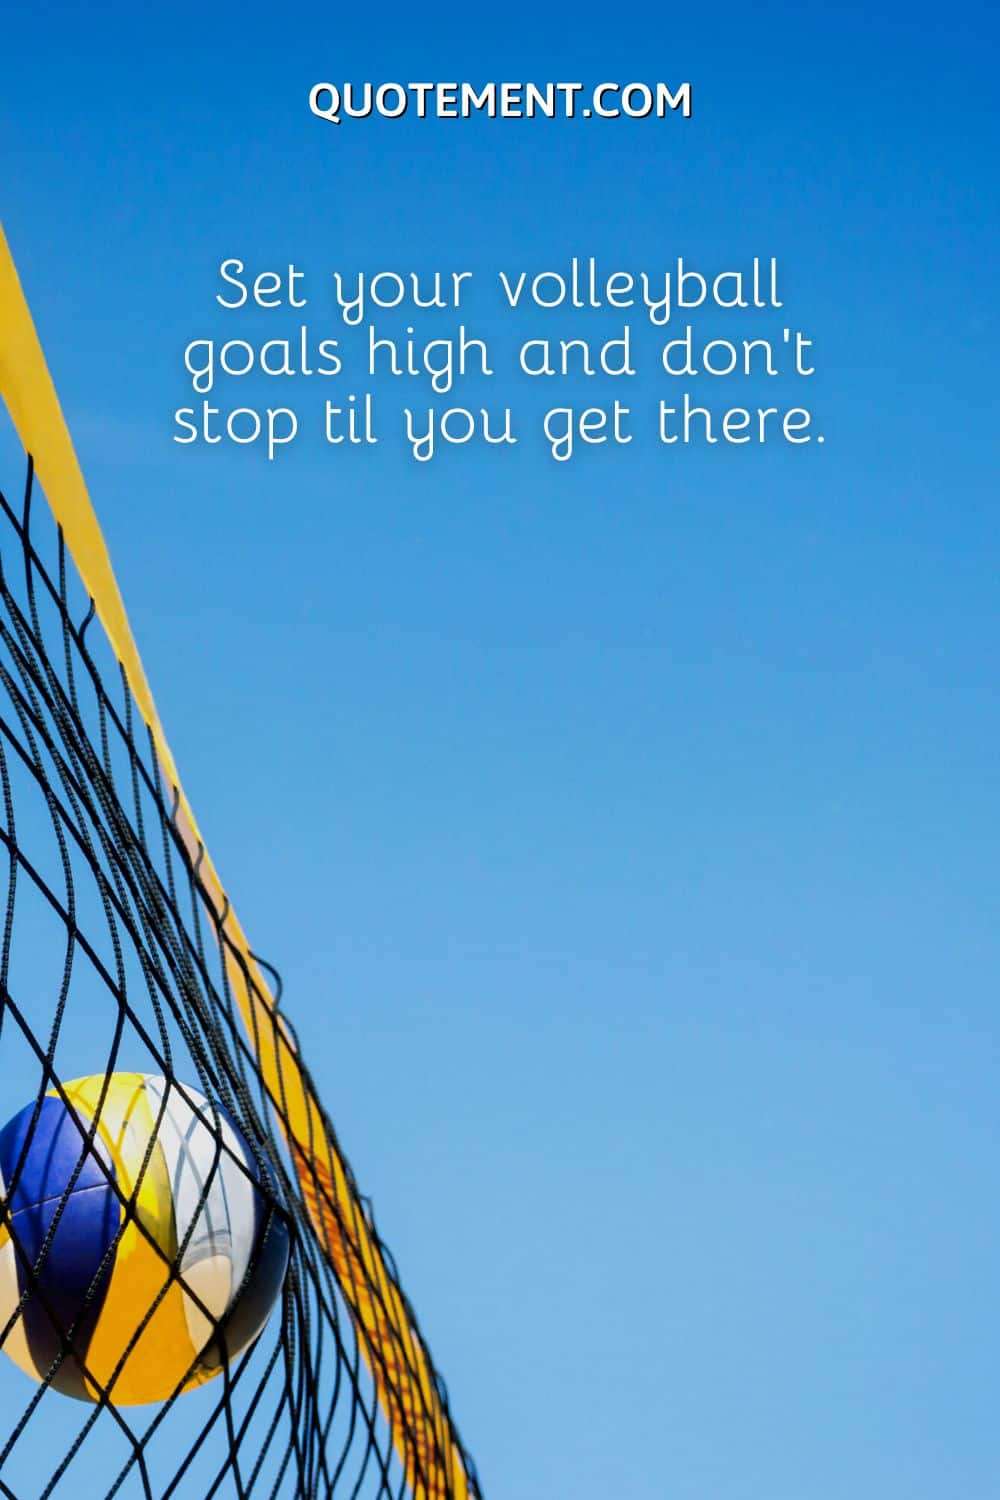 Set your volleyball goals high and don’t stop til you get there.